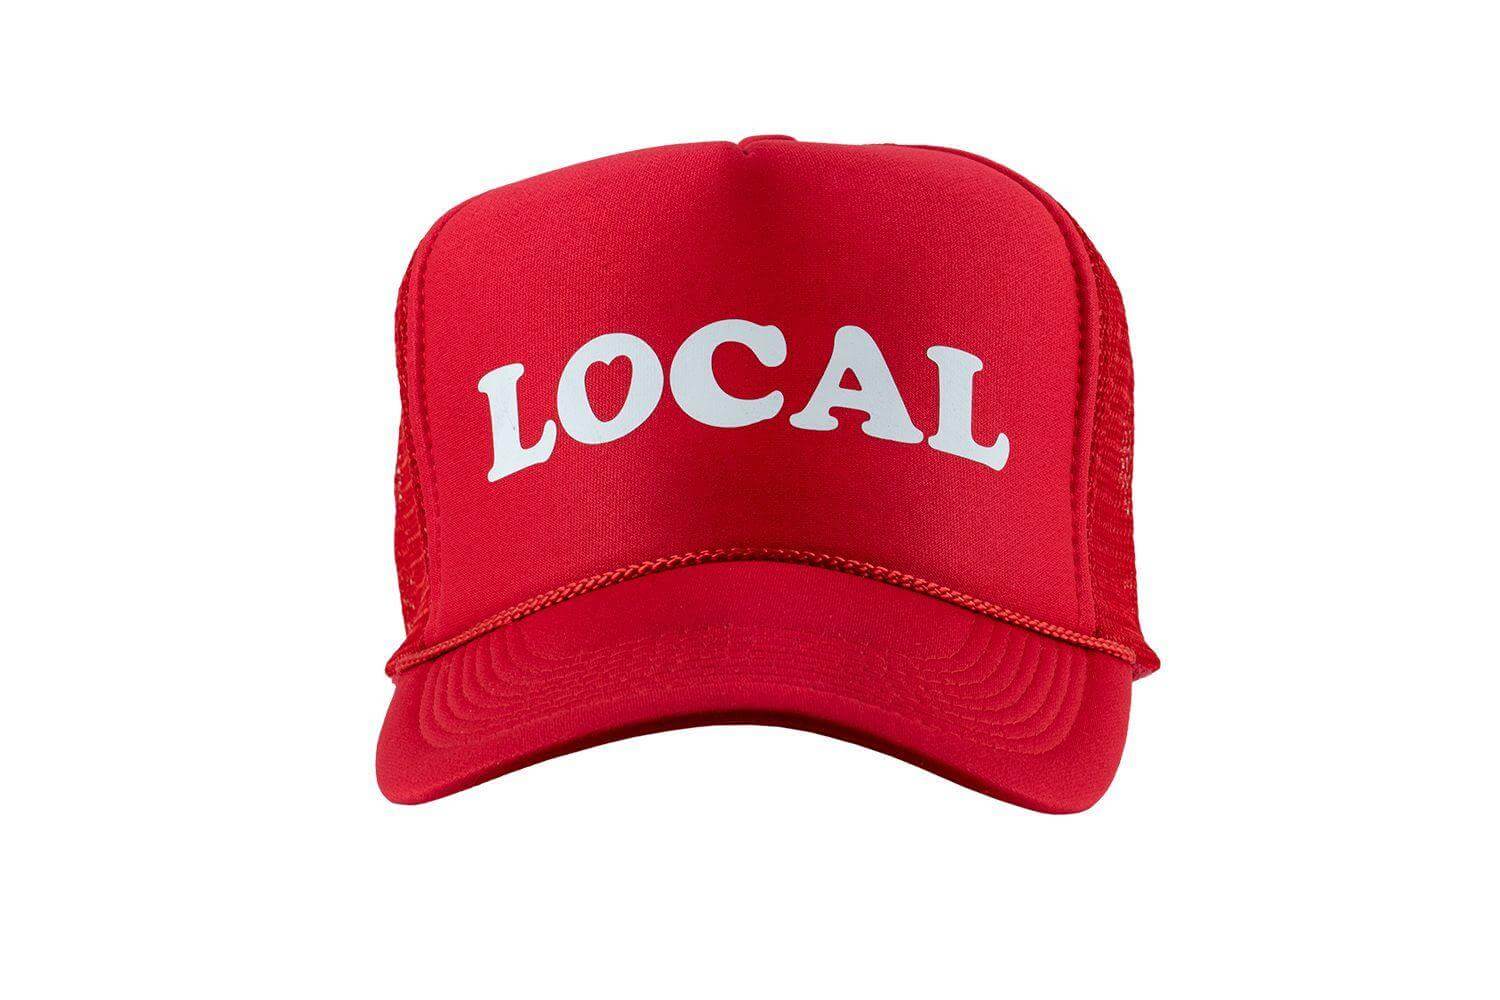 Love Local (Parrot Red) high crown trucker cap with mesh back and snapback - Tropic Trucker Australia®